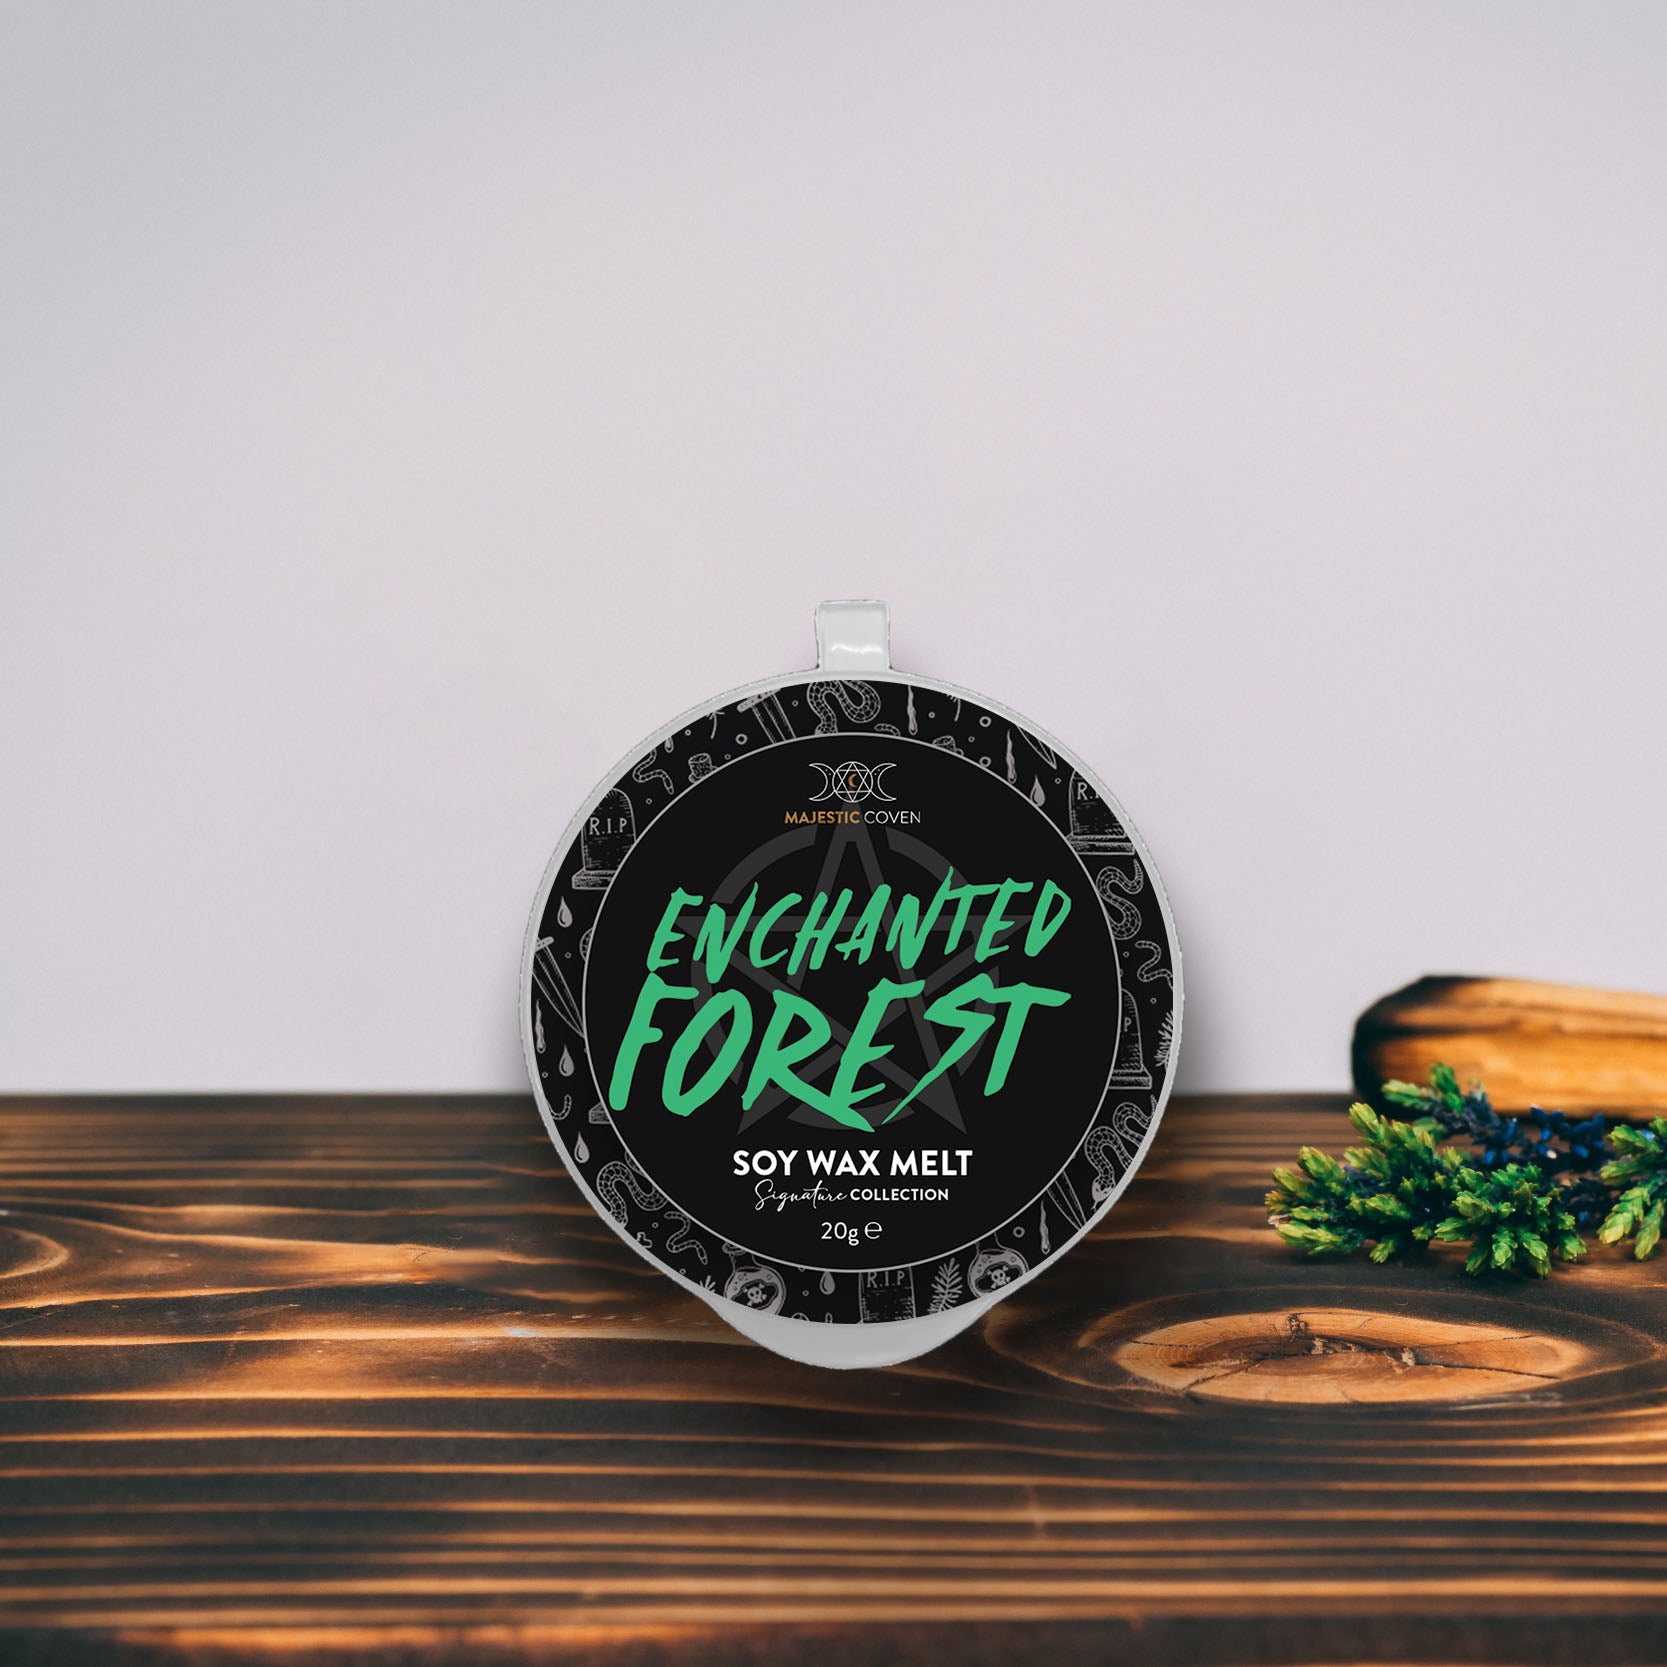 Enchanted Forest - Soy Wax Melt 20g Sample Pot Majestic Coven